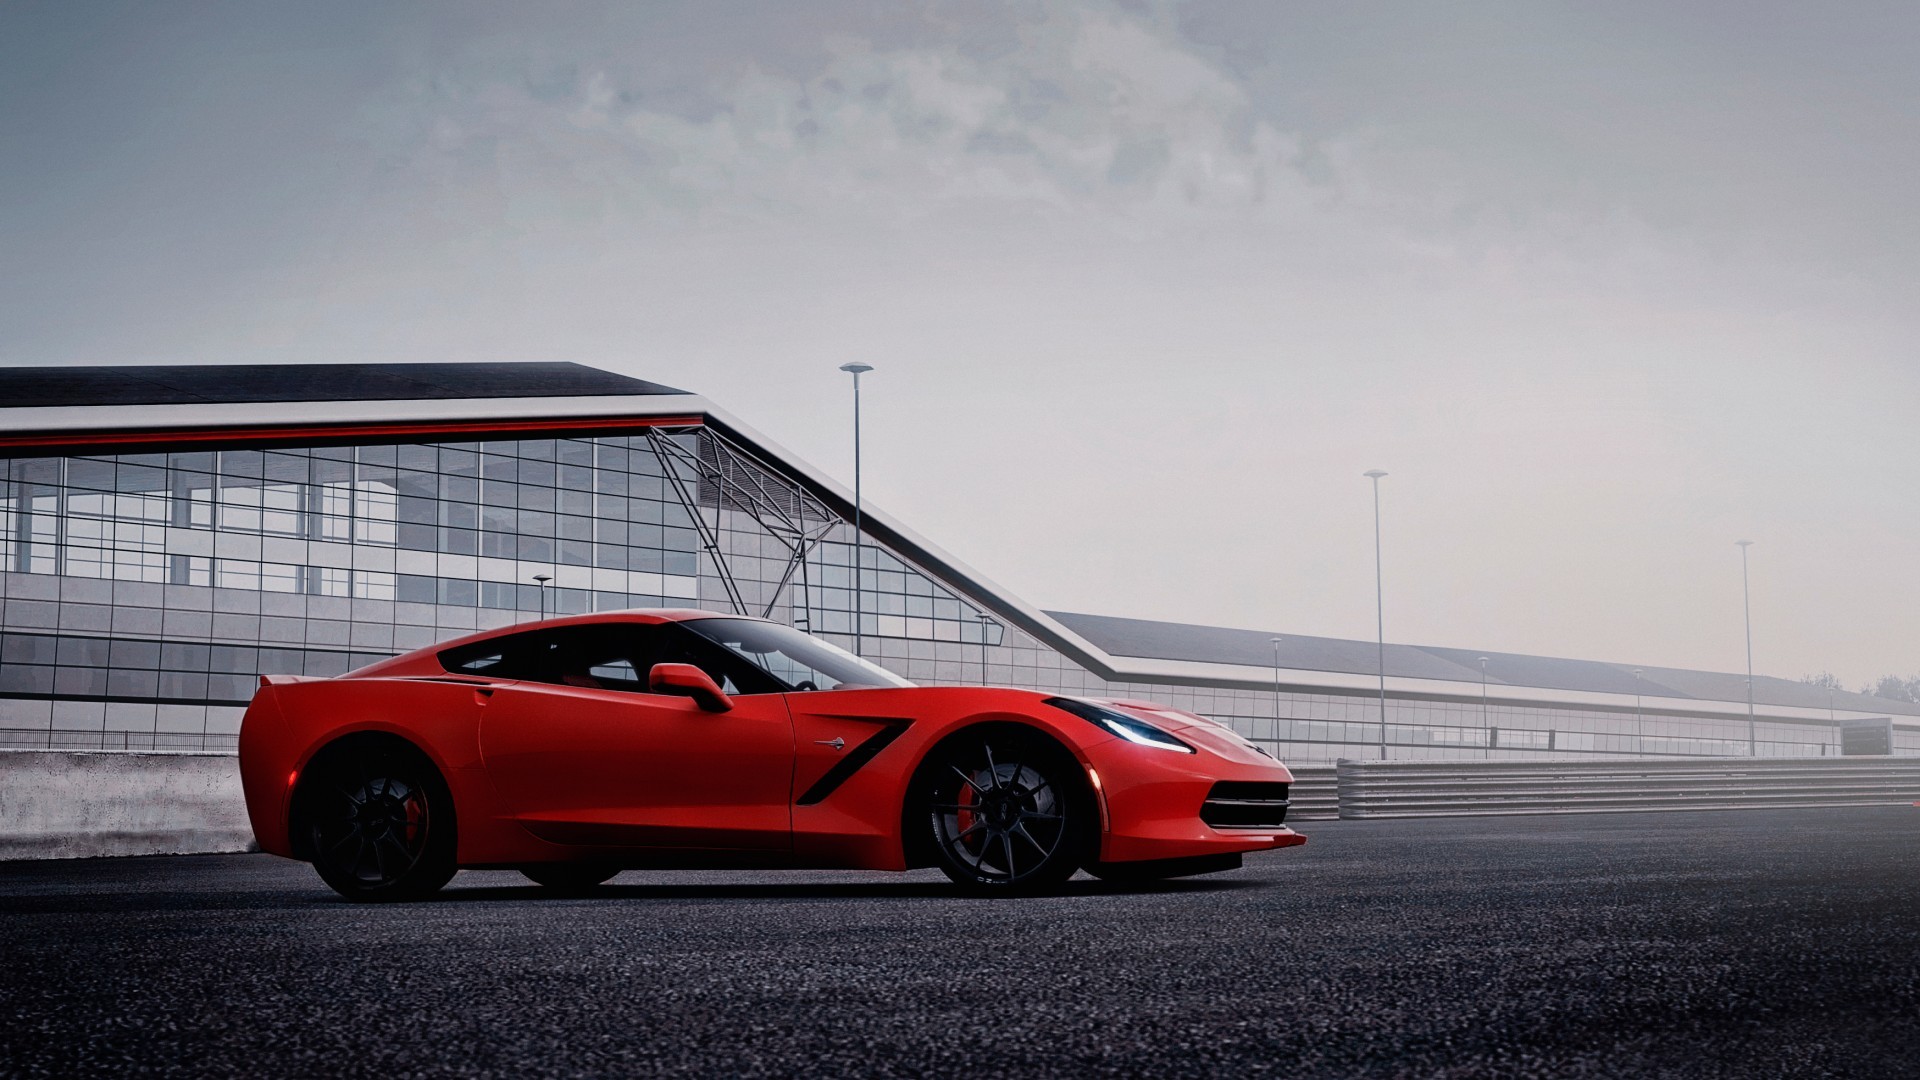 General 1920x1080 car red cars vehicle Chevrolet Corvette American cars Chevrolet Corvette C7